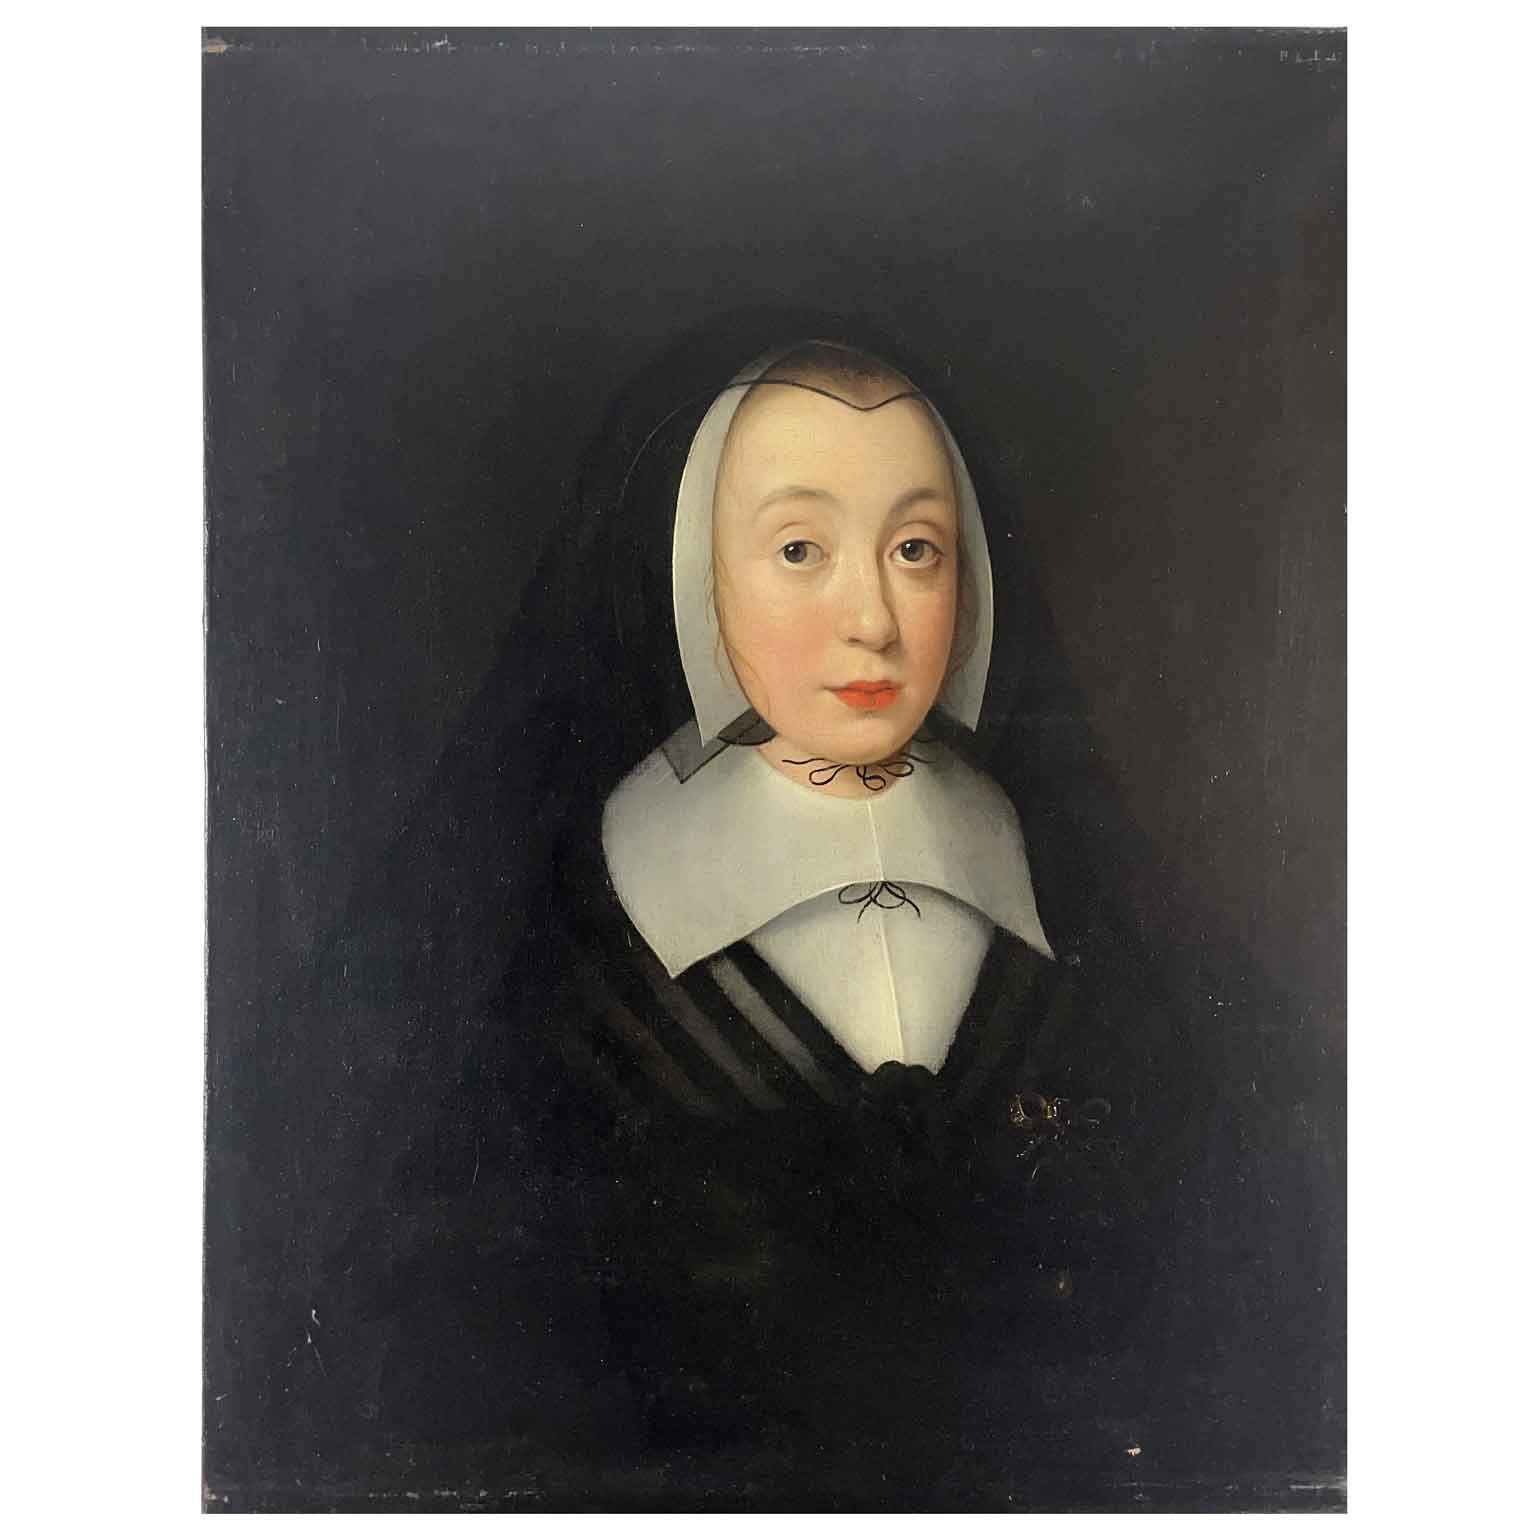 Reputed Portrait of Jane Bromley, as a Young Widow by British, English School, oil on canvas painting circa 1640/1650, in good condition, set in a modern frame. It comes from a private Lombard Italian collection.

Jane Bromley is painted wearing a